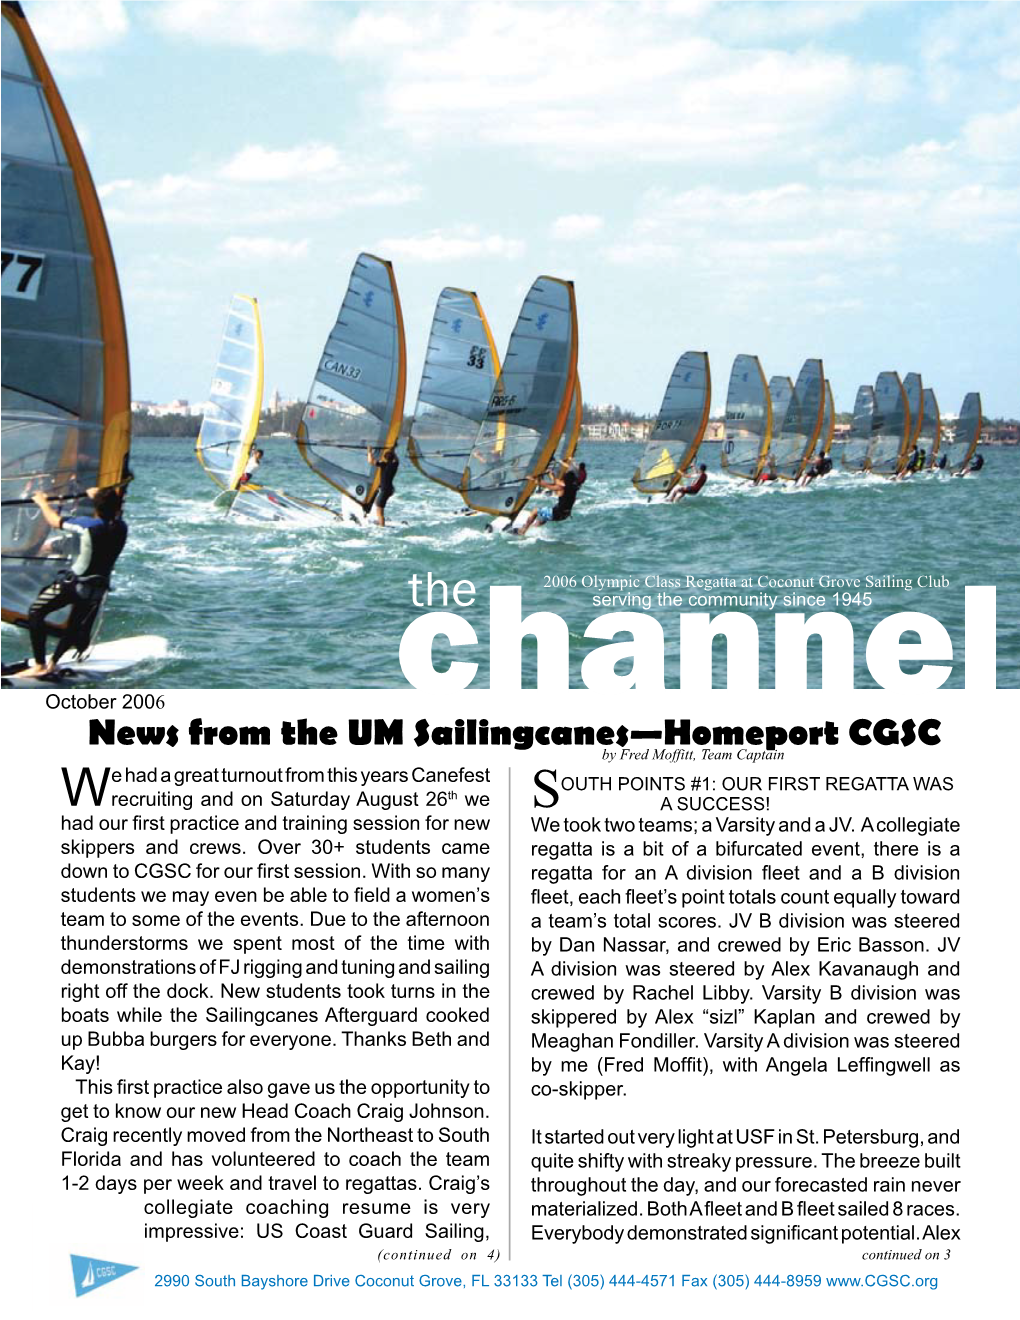 News from the UM Sailingcanes—Homeport CGSC